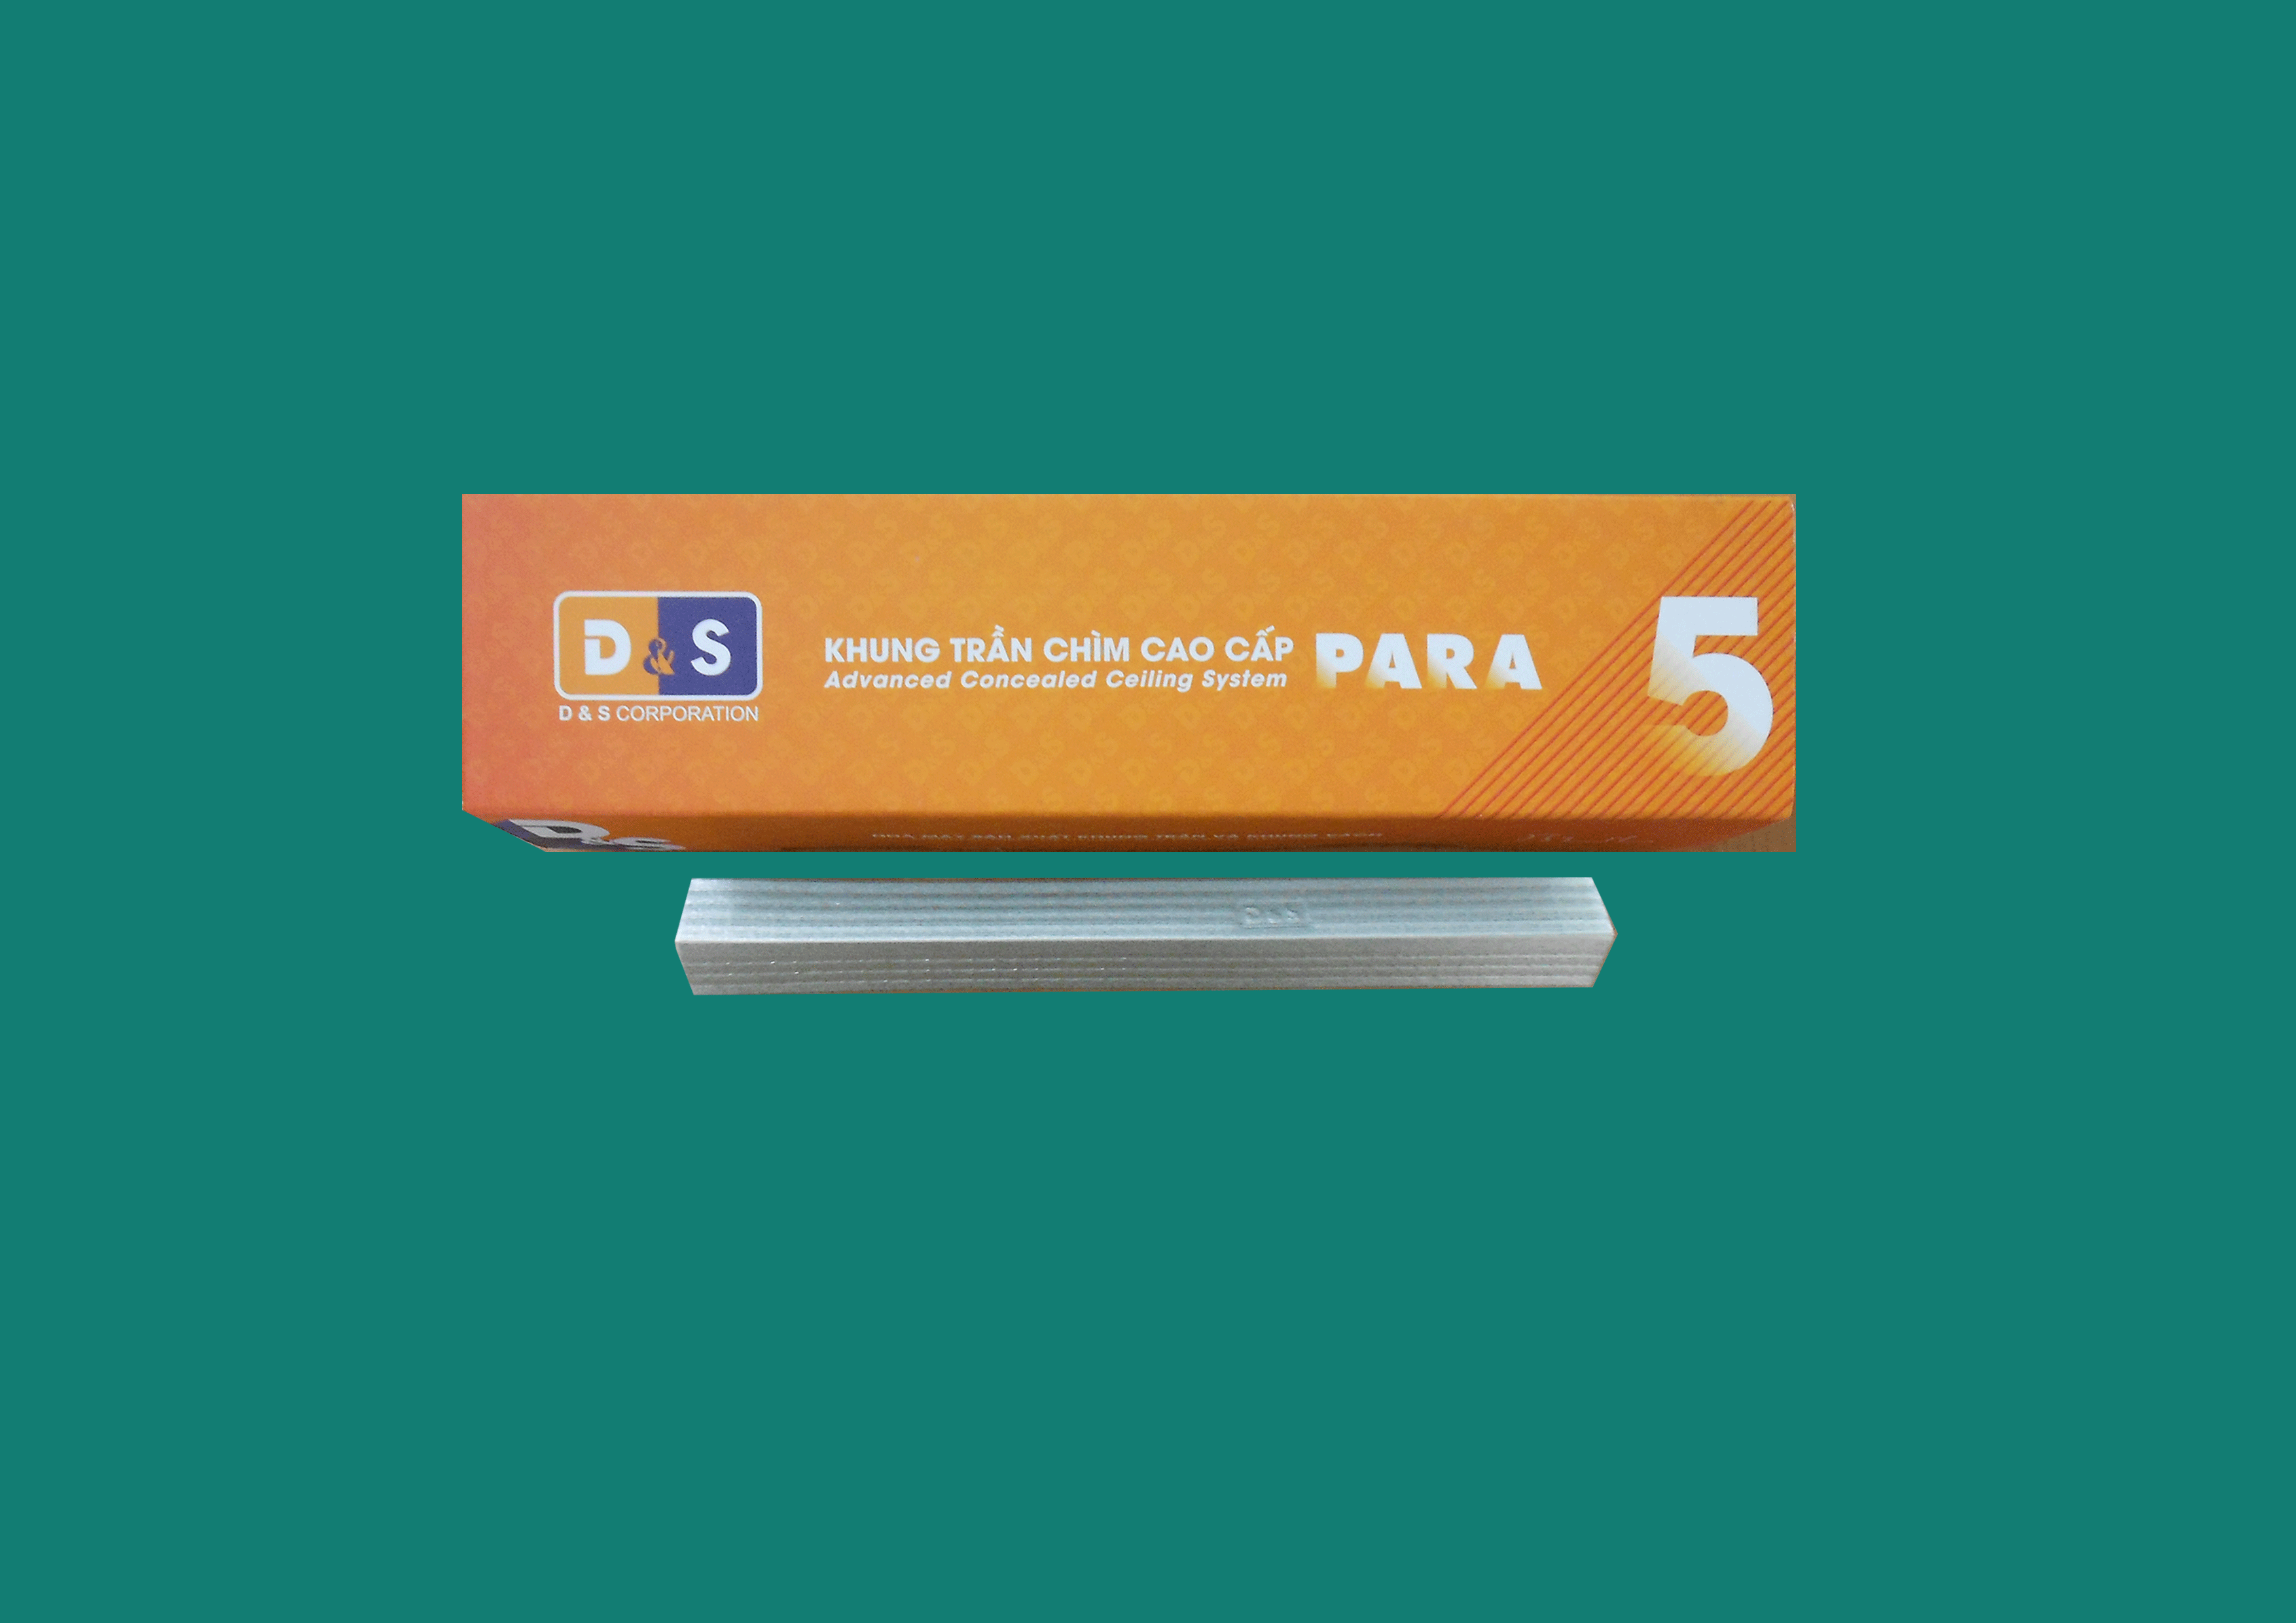 Para 5 Advanced Concealed Ceiling